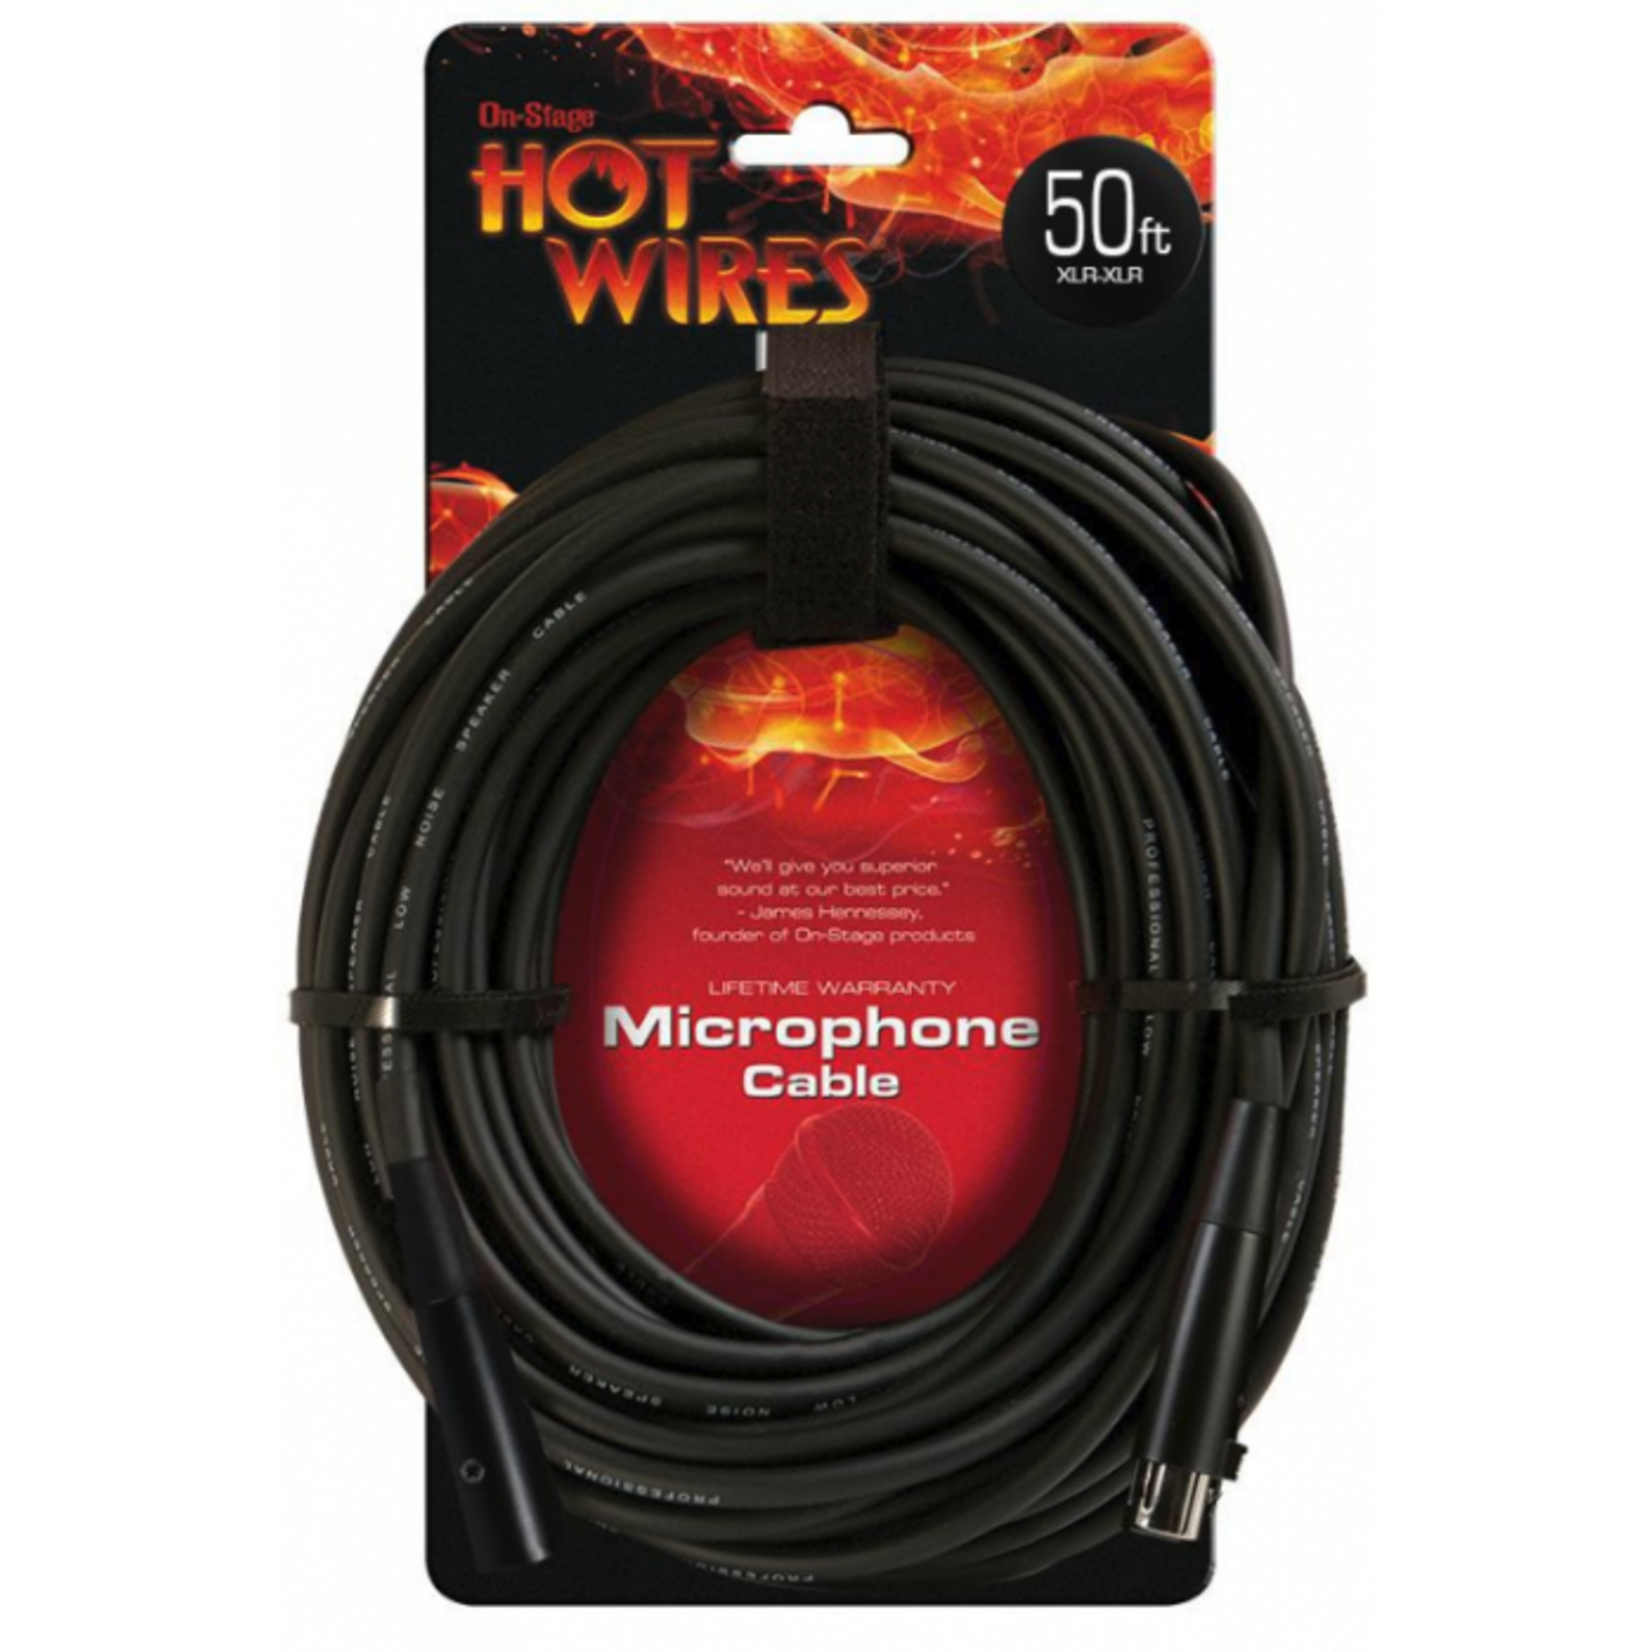 On-Stage MC12-50 50' Hot Wires Microphone Cable